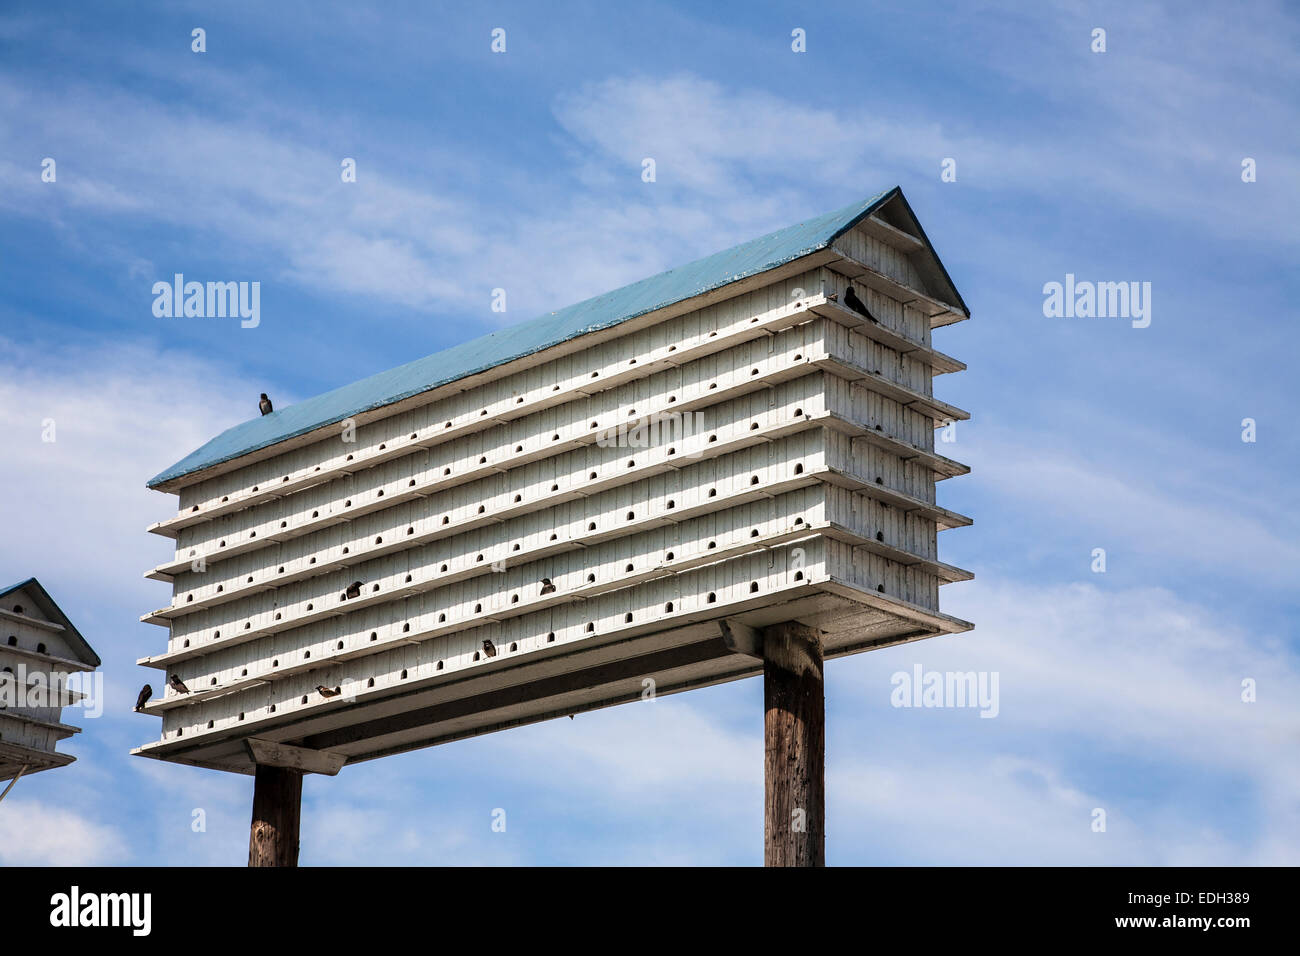 Large unusual purple martin house wooden birdhouse colony, blue sky in Pennsylvania, USA, bird nest, Pa images, nest boxes, nesting swallows, unique Stock Photo